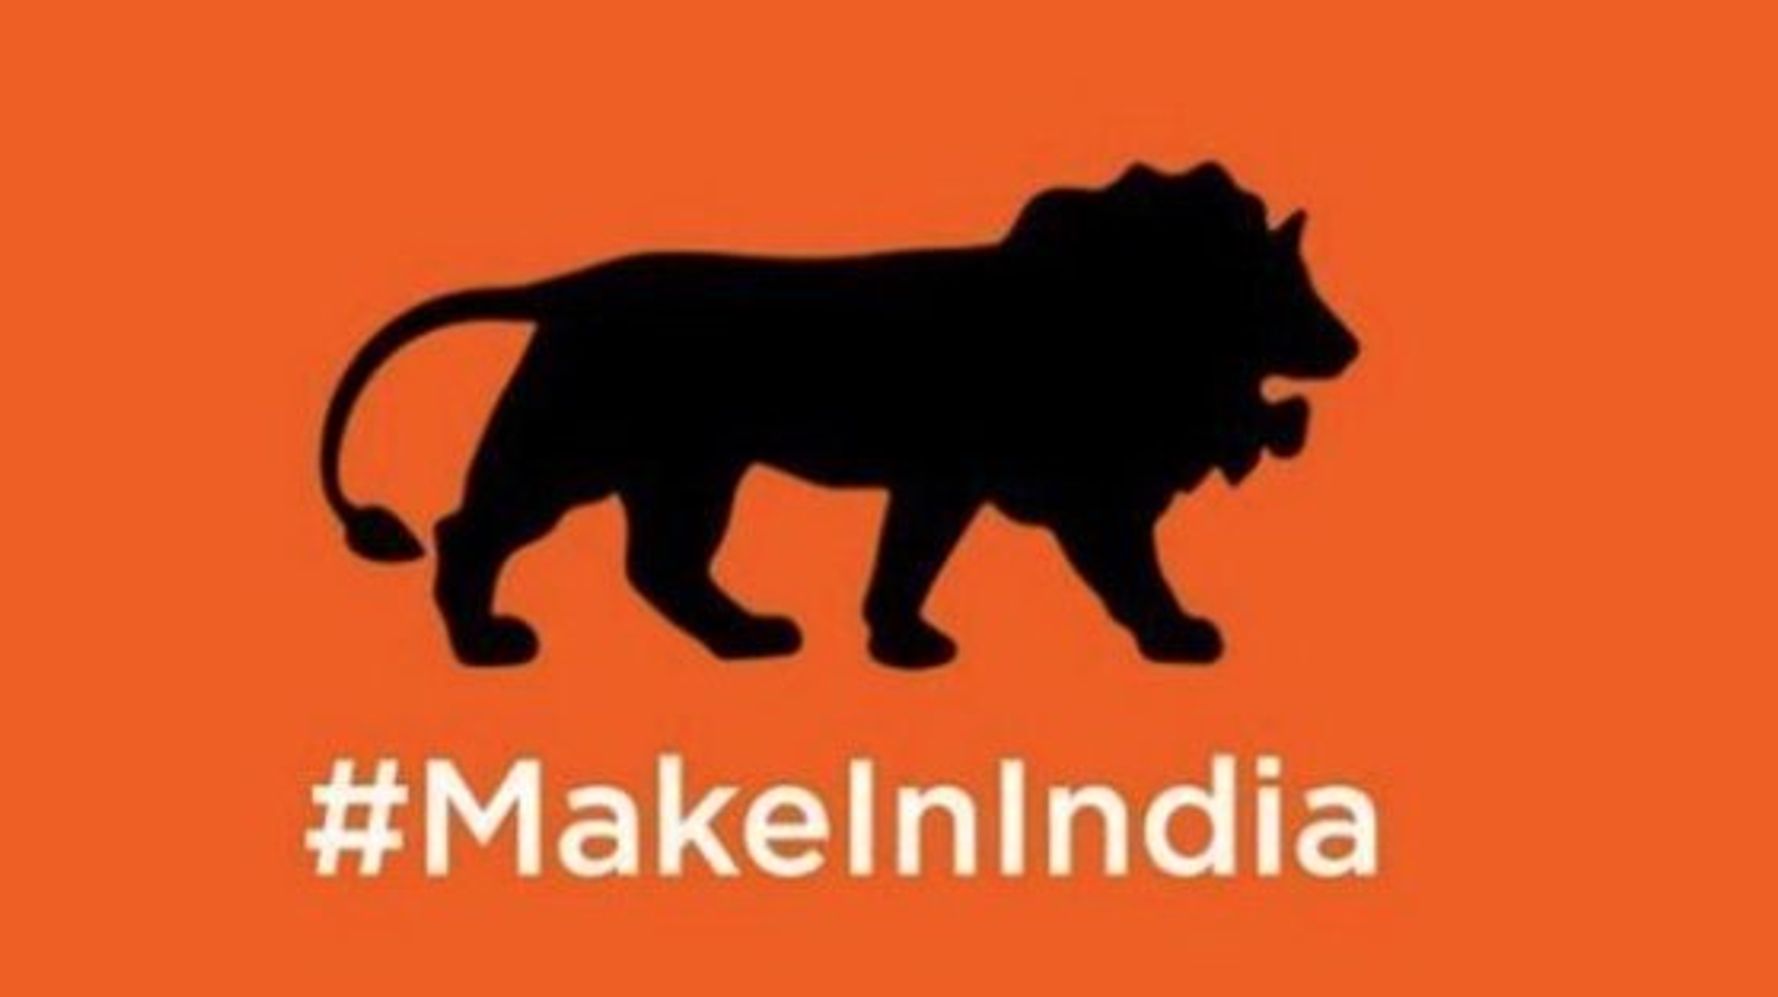 Meet The Man Who Designed The Make In India Logo | HuffPost News